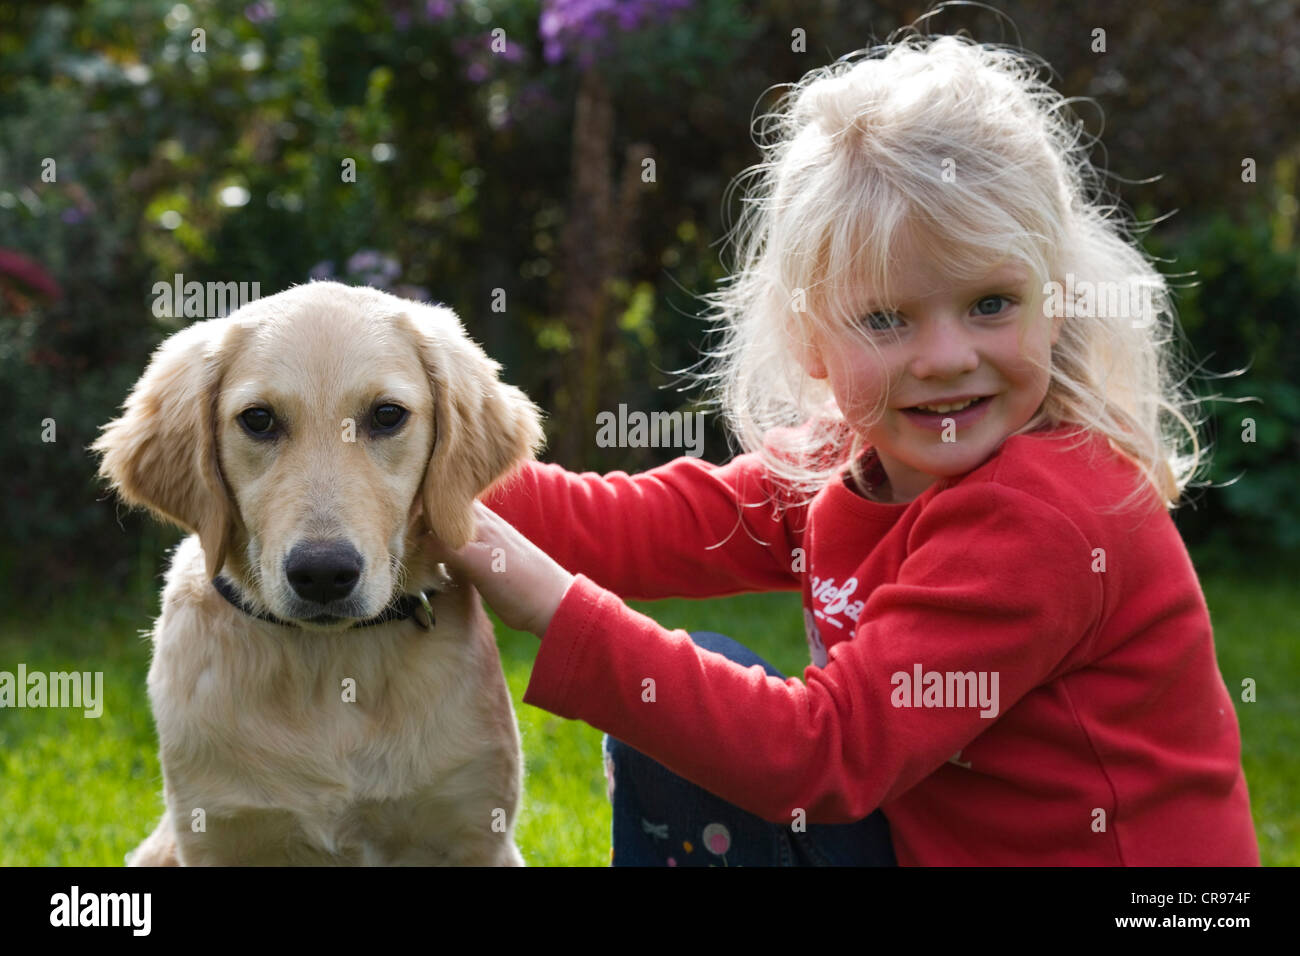 Blond girl sitting in a garden with a Golden Retriever, Upper Bavaria, Germany Stock Photo